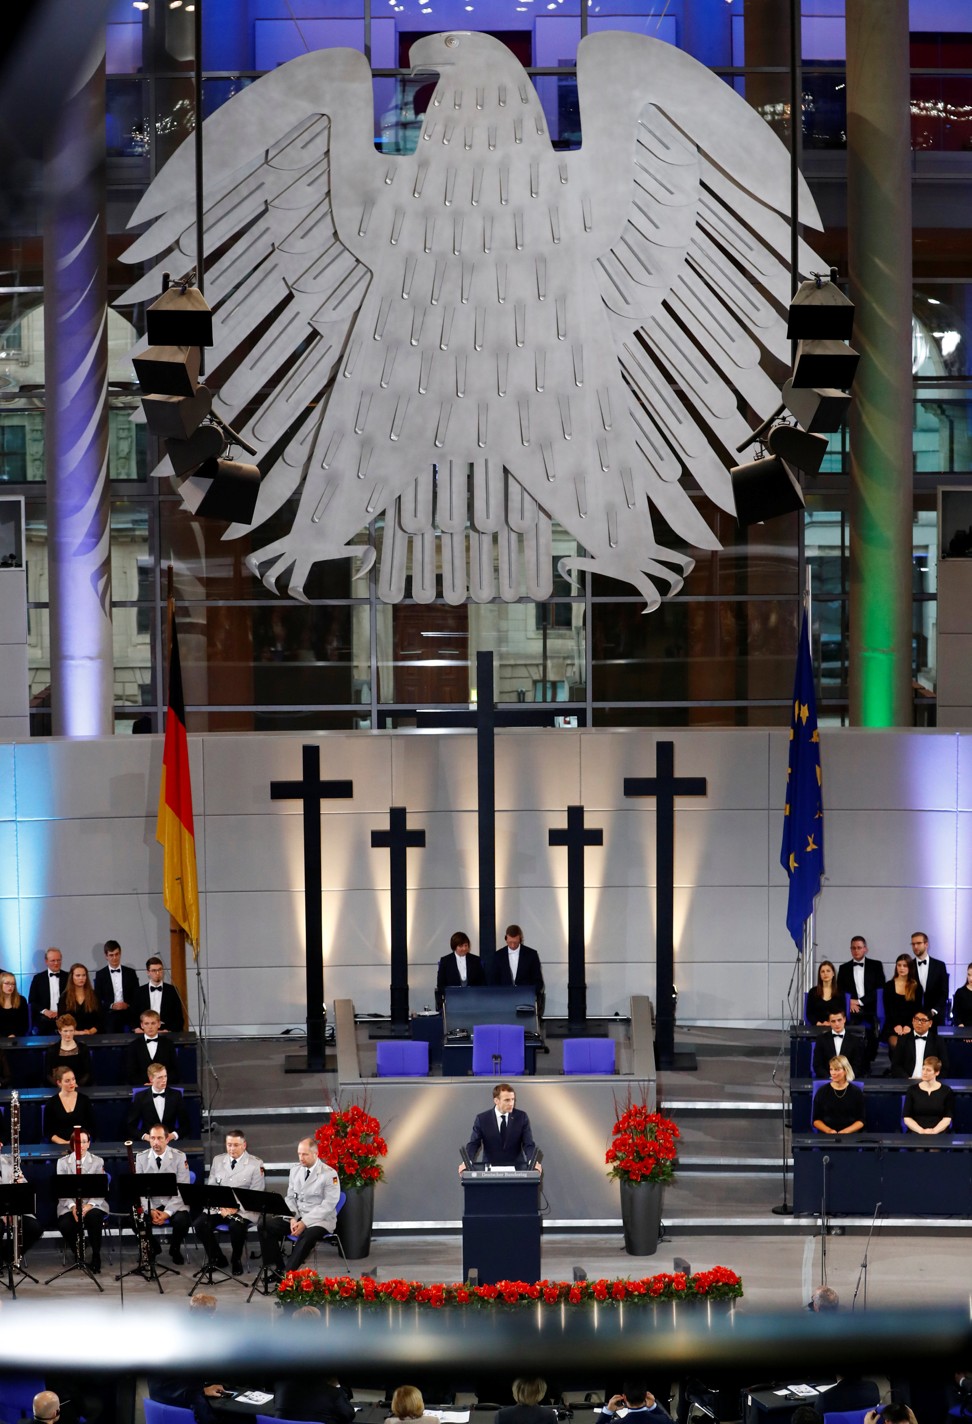 French President Emmanuel Macron gives a speech during a ceremony at the lower house of parliament Bundestag in the Reichstag building in Berlin to mark National Mourning Day. Photo: Reuters